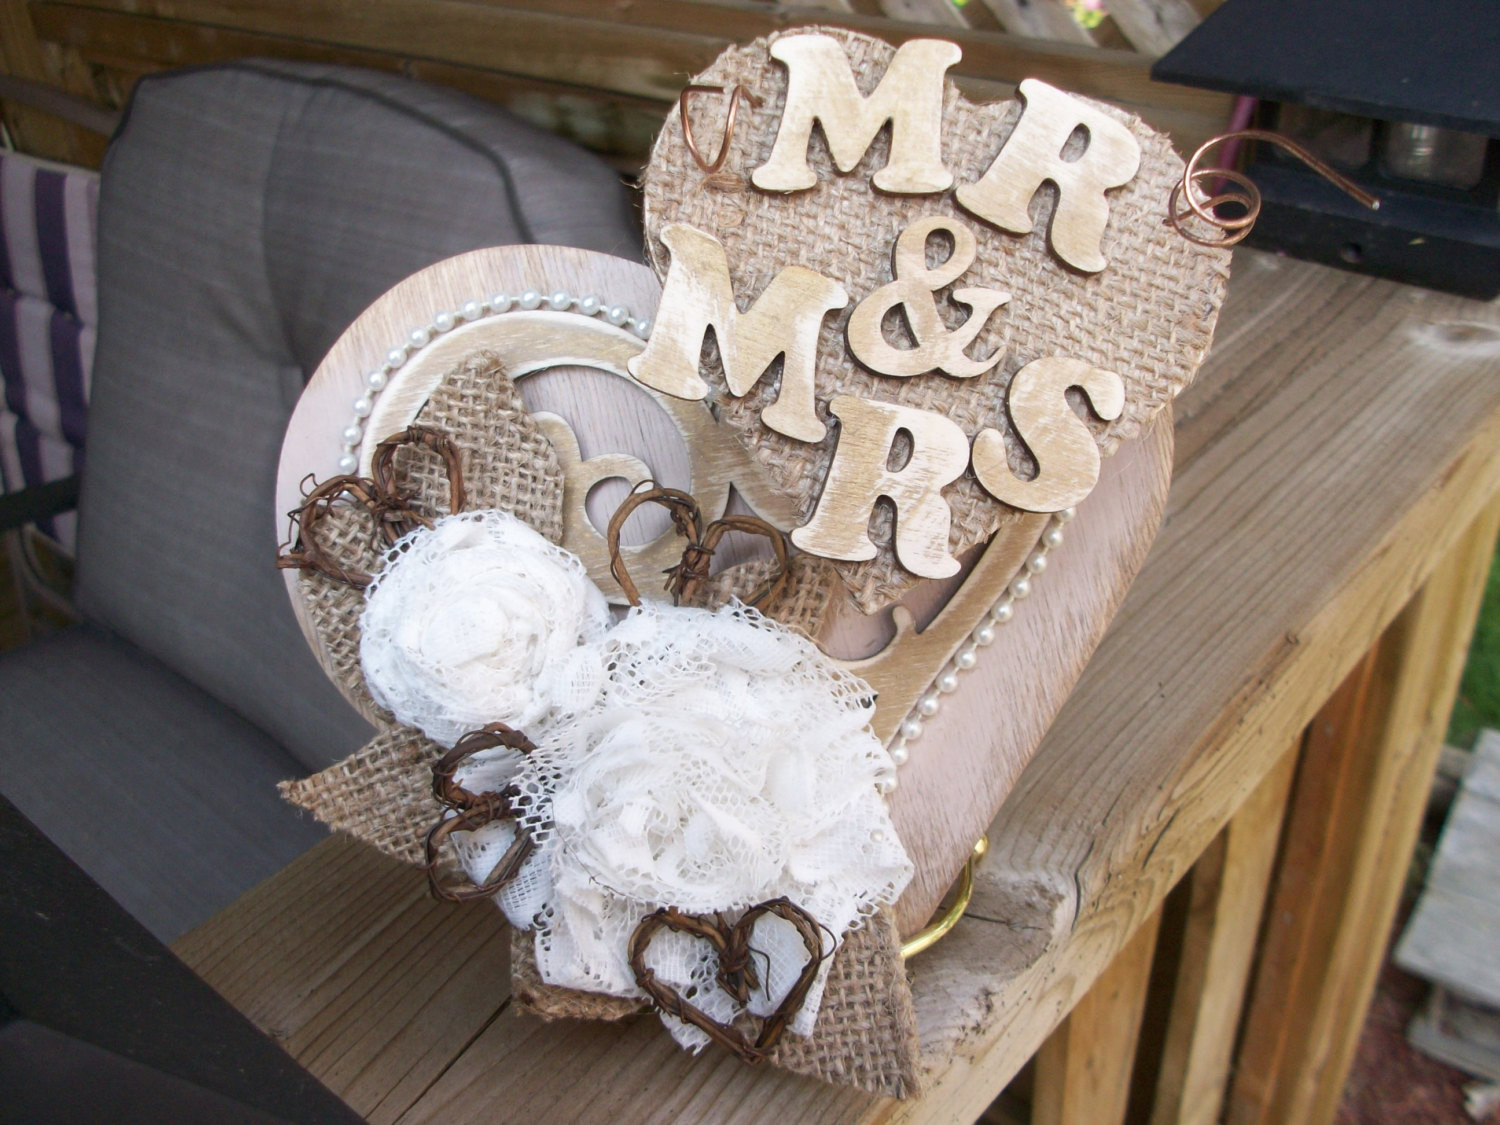 Burlap Wedding Cake Toppers
 Wedding Cake Topper Rustic Burlap and Lace by